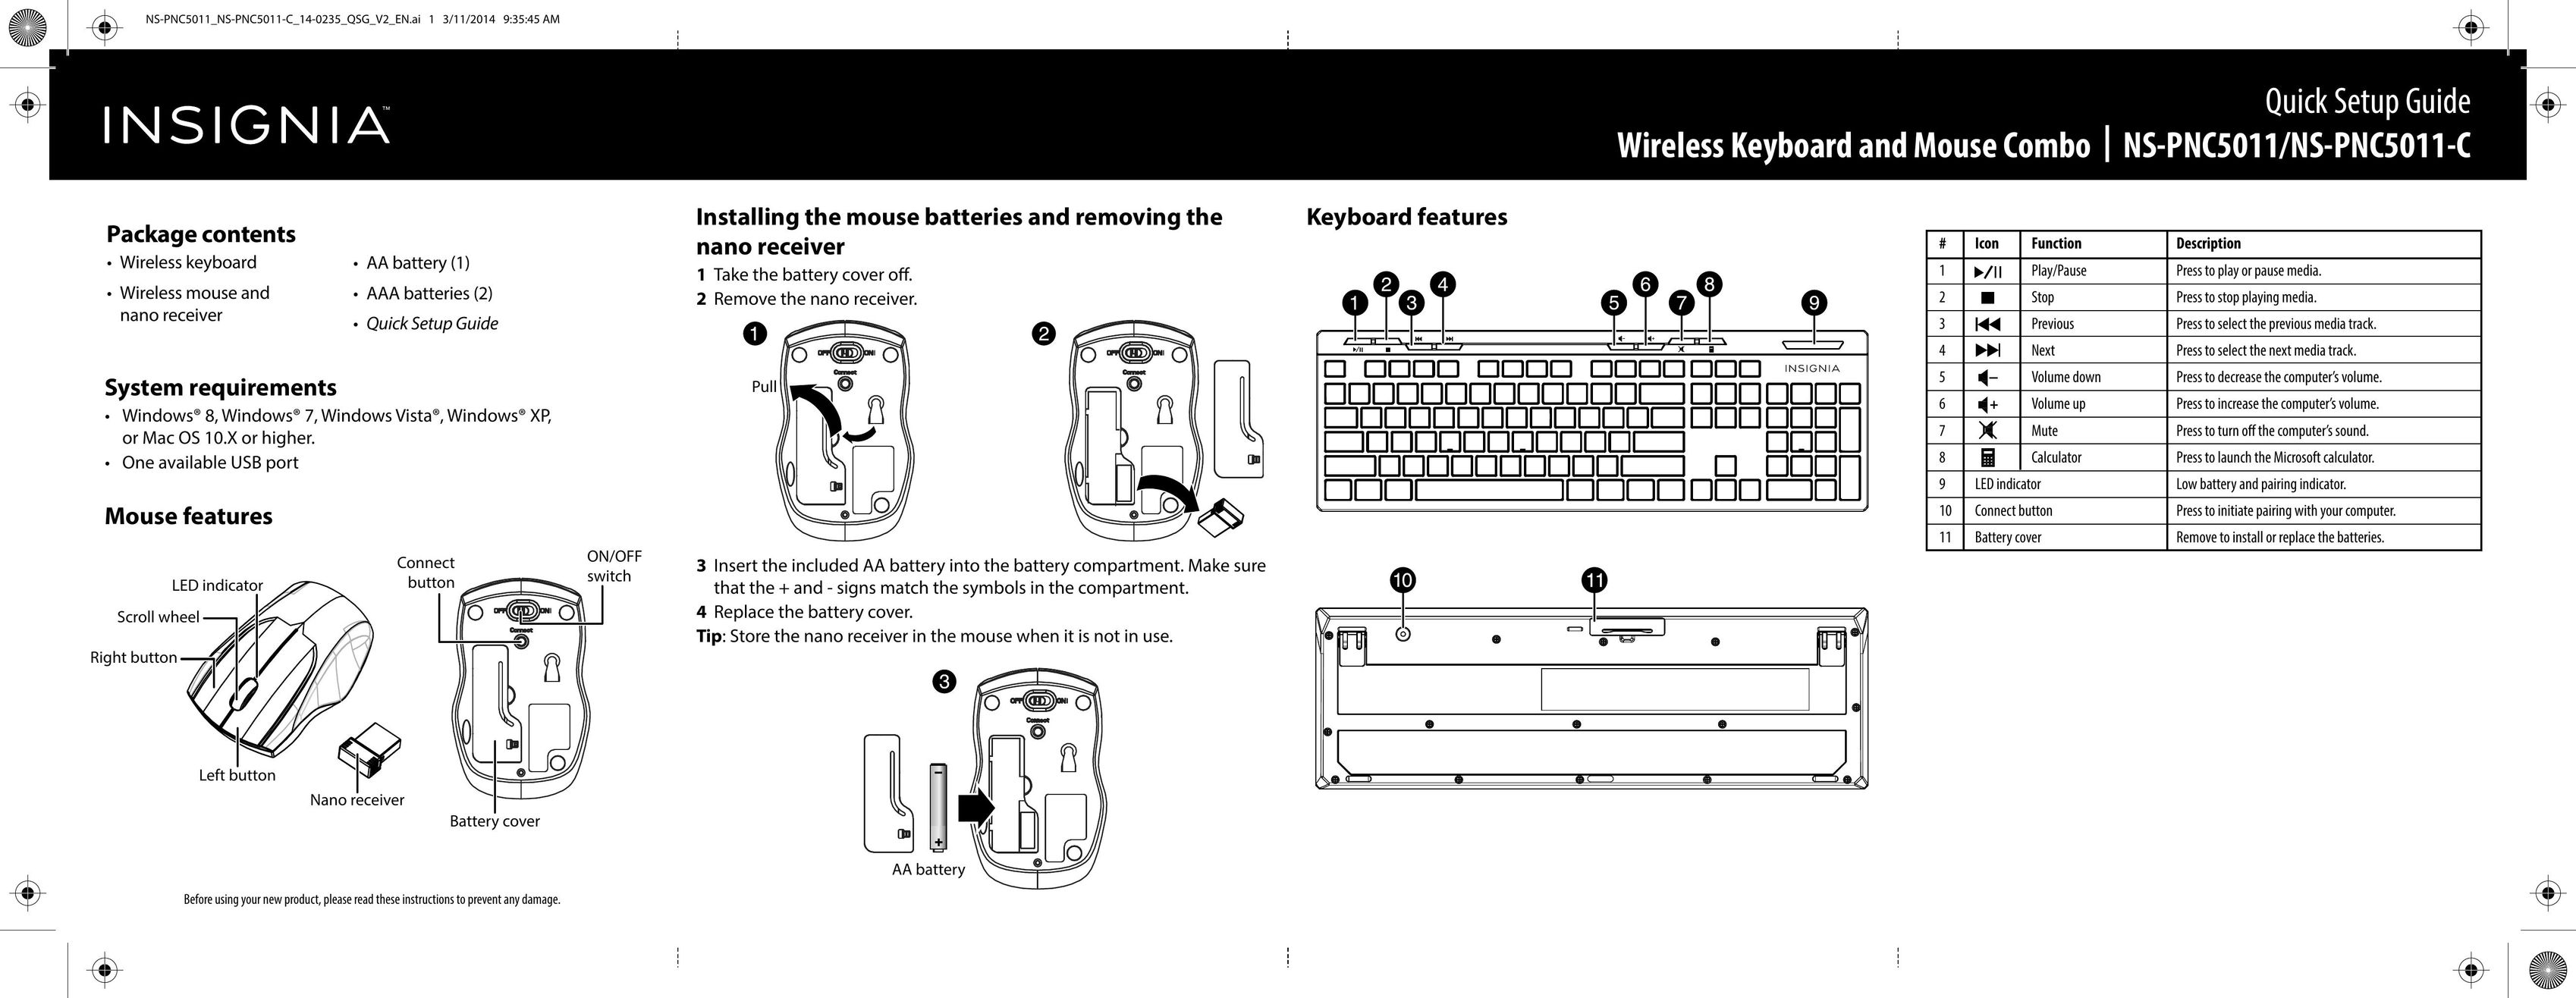 Insignia NS-PNC5011-C Mouse User Manual